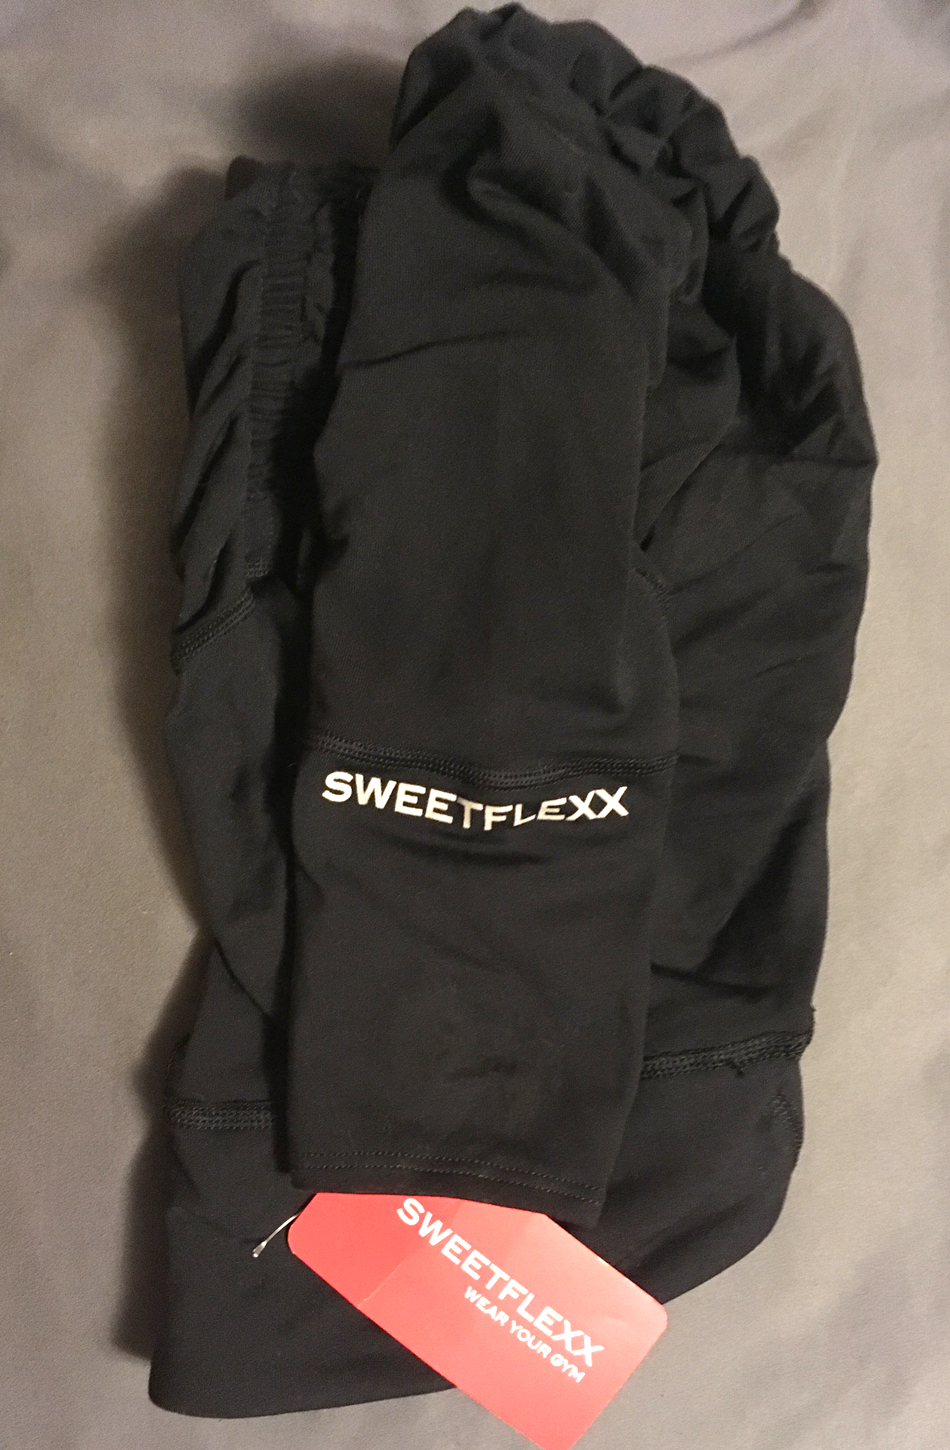 Sweetflexx Leggings Reviews: Separating Fact From Fiction - Sweetflexx  Leggings Put to the Test: Our Verdict - Podcast en iVoox